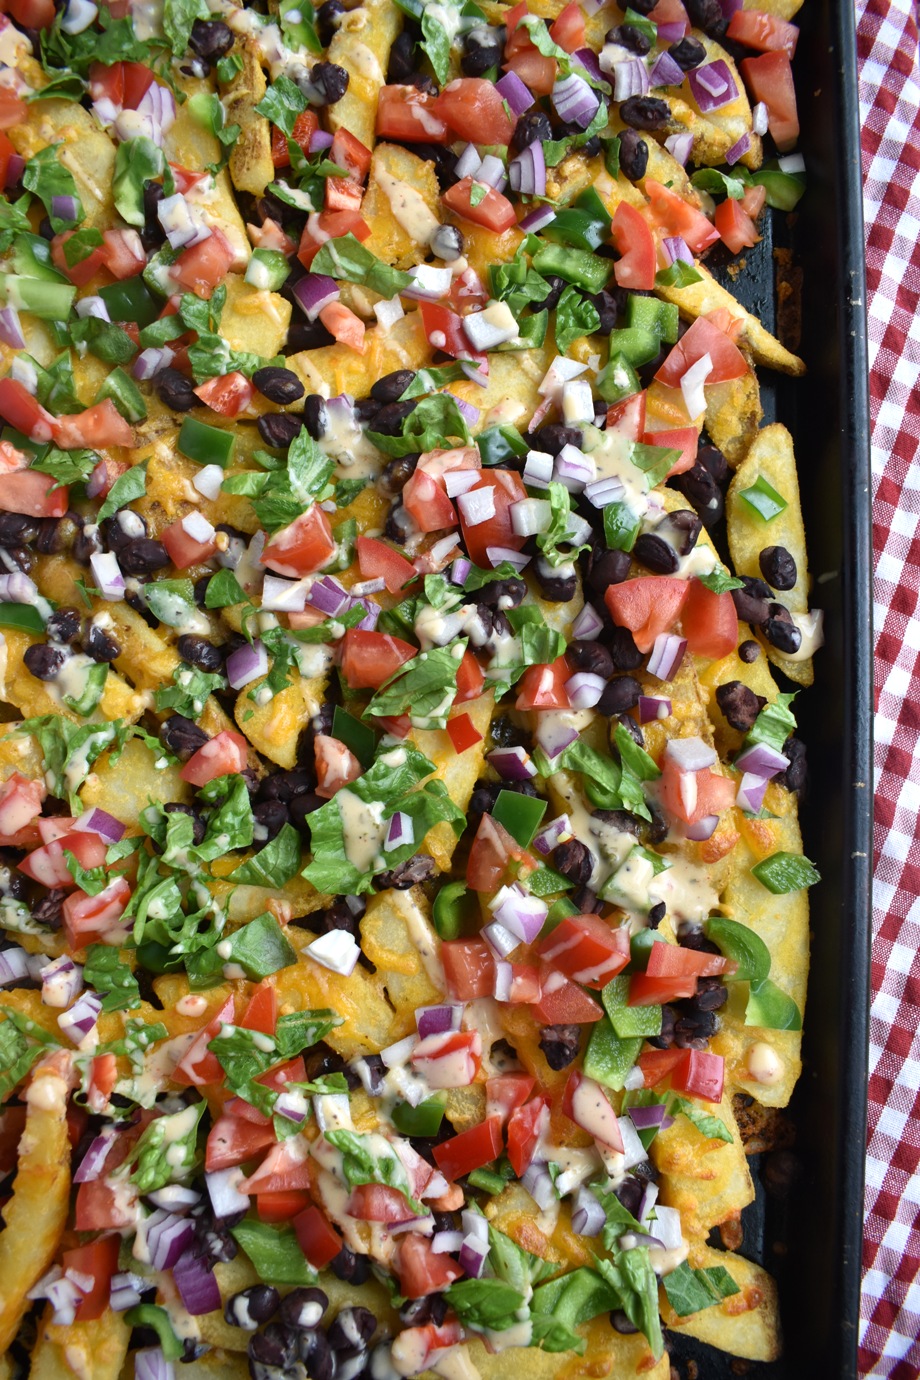 Loaded Nacho Fries feature crispy steak fries topped with melted cheddar cheese, black beans, bell peppers, tomatoes, red onion, lettuce, ranch and salsa for a super delicious and easy appetizer!